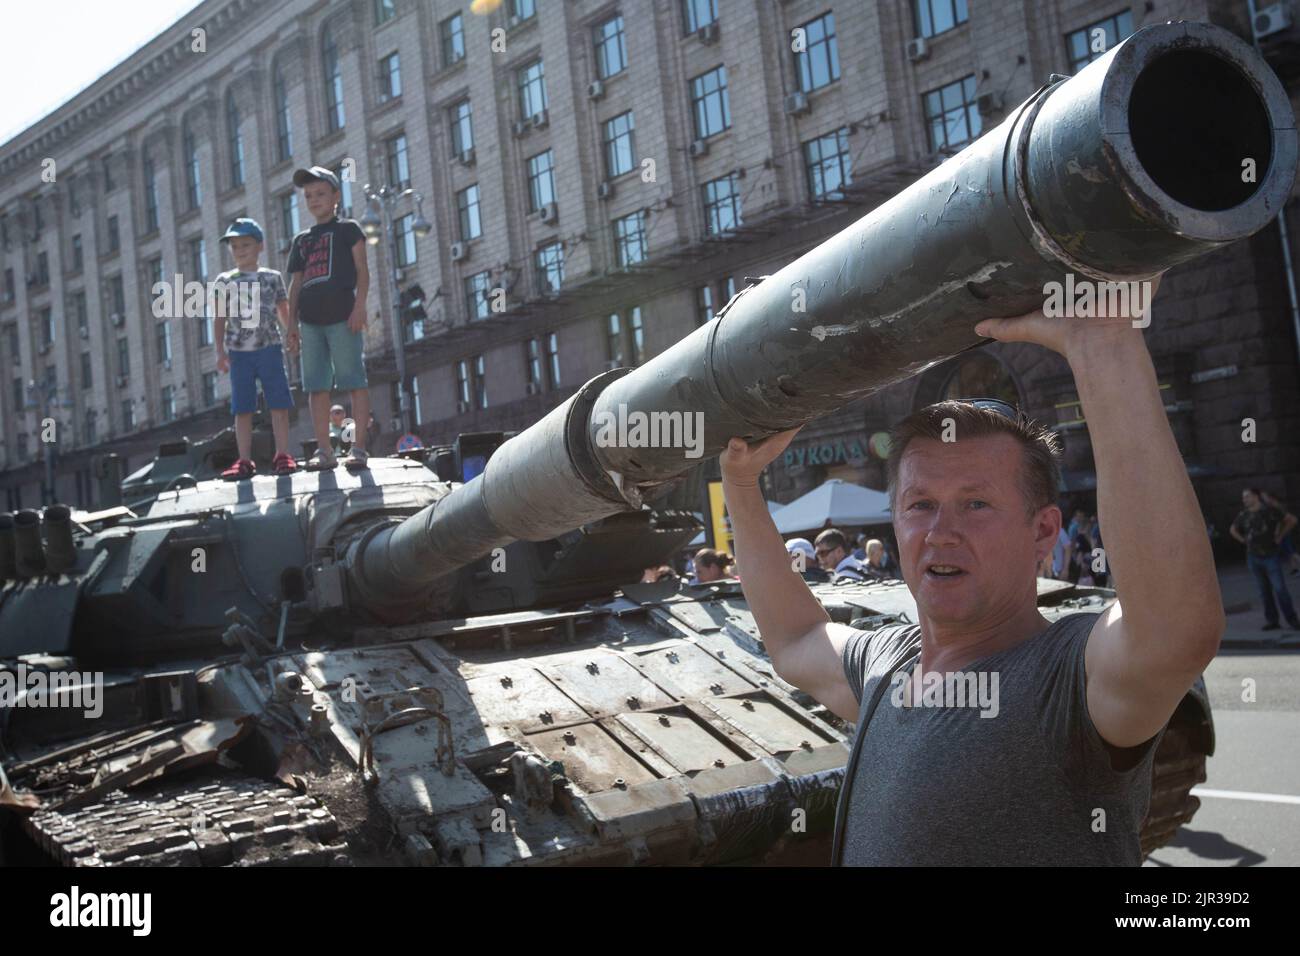 A man poses for a photo next to a destroyed Russian tank displayed on the main street Khreshchatyk as part of the upcoming celebration of the Independence Day of Ukraine amid Russia's invasion of Ukraine in central Kyiv. Stock Photo